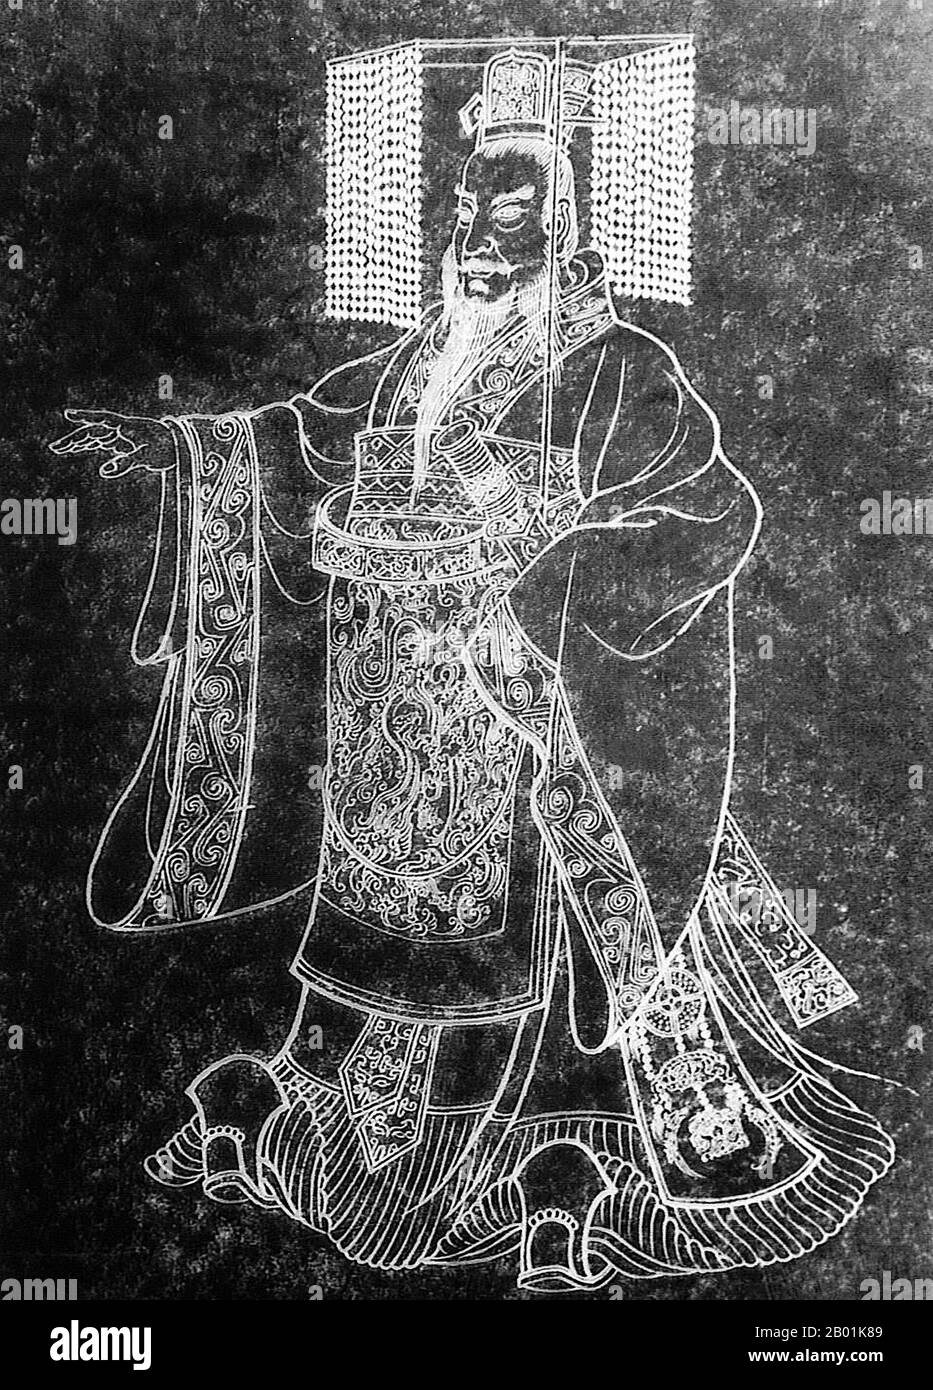 China: Qin Shu Huang/Qin Shi Huangdi (259-210 BCE), First Emperor of a unified China. Ink rubbing from a stone tablet, c. 18th century.  Qin Shi Huang, personal name Ying Zheng, was king of the Chinese State of Qin from 246 to 221 BCE during the Warring States Period. He became the first emperor of a unified China in 221 BCE, and ruled until his death in 210 BC at the age of 49. Styling himself 'First Emperor' after China's unification, Qin Shi Huang is a pivotal figure in Chinese history, ushering in nearly two millennia of imperial rule. Stock Photo